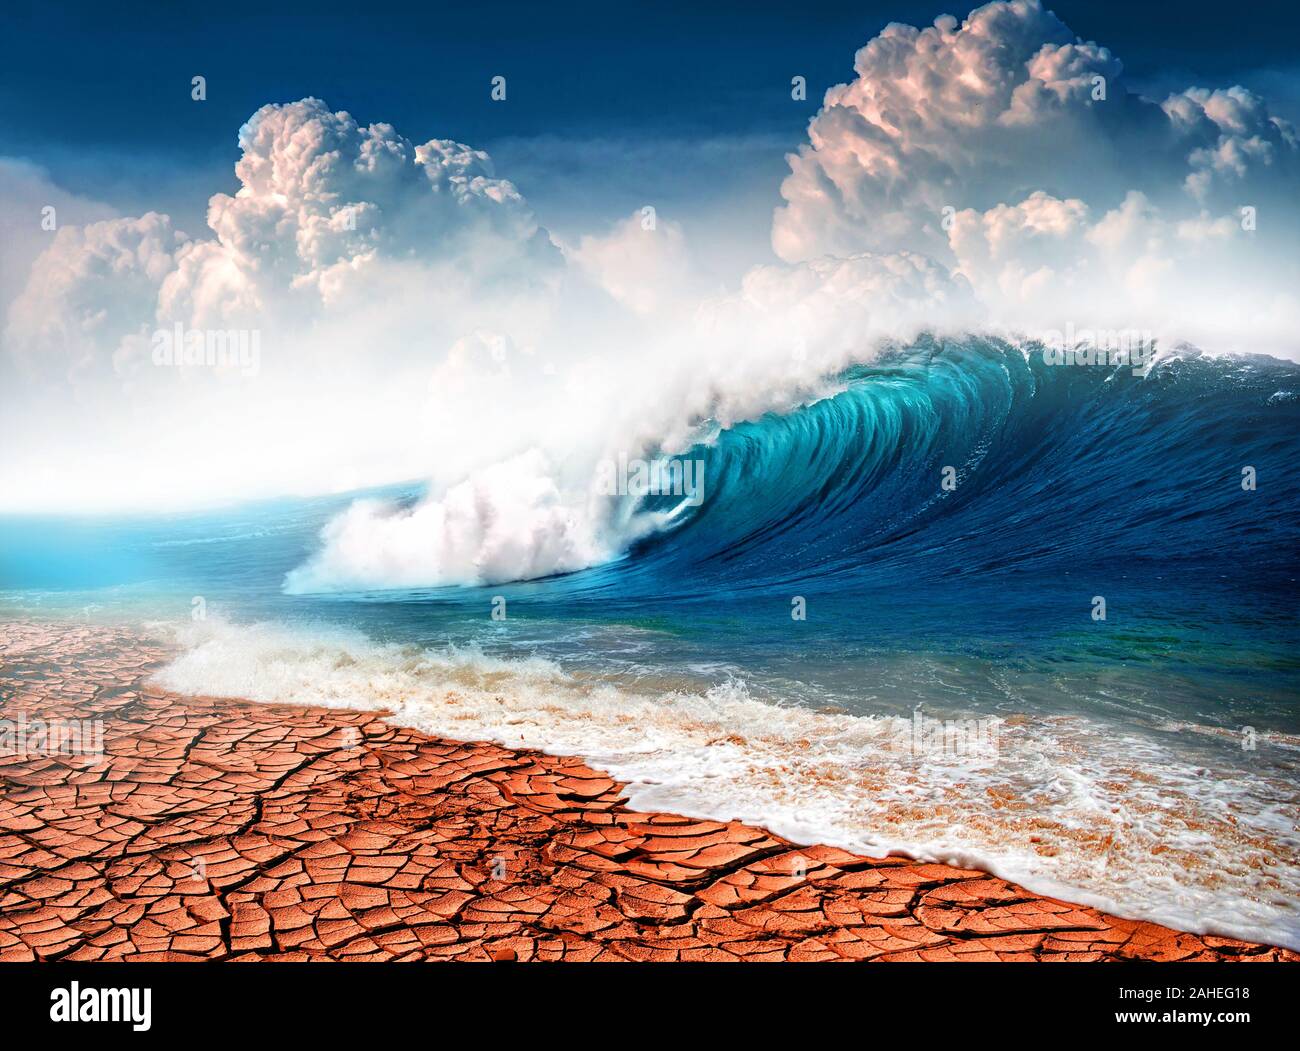 Flash flood in a dry desert. Polar ice melting climate change theme concept. Stock Photo